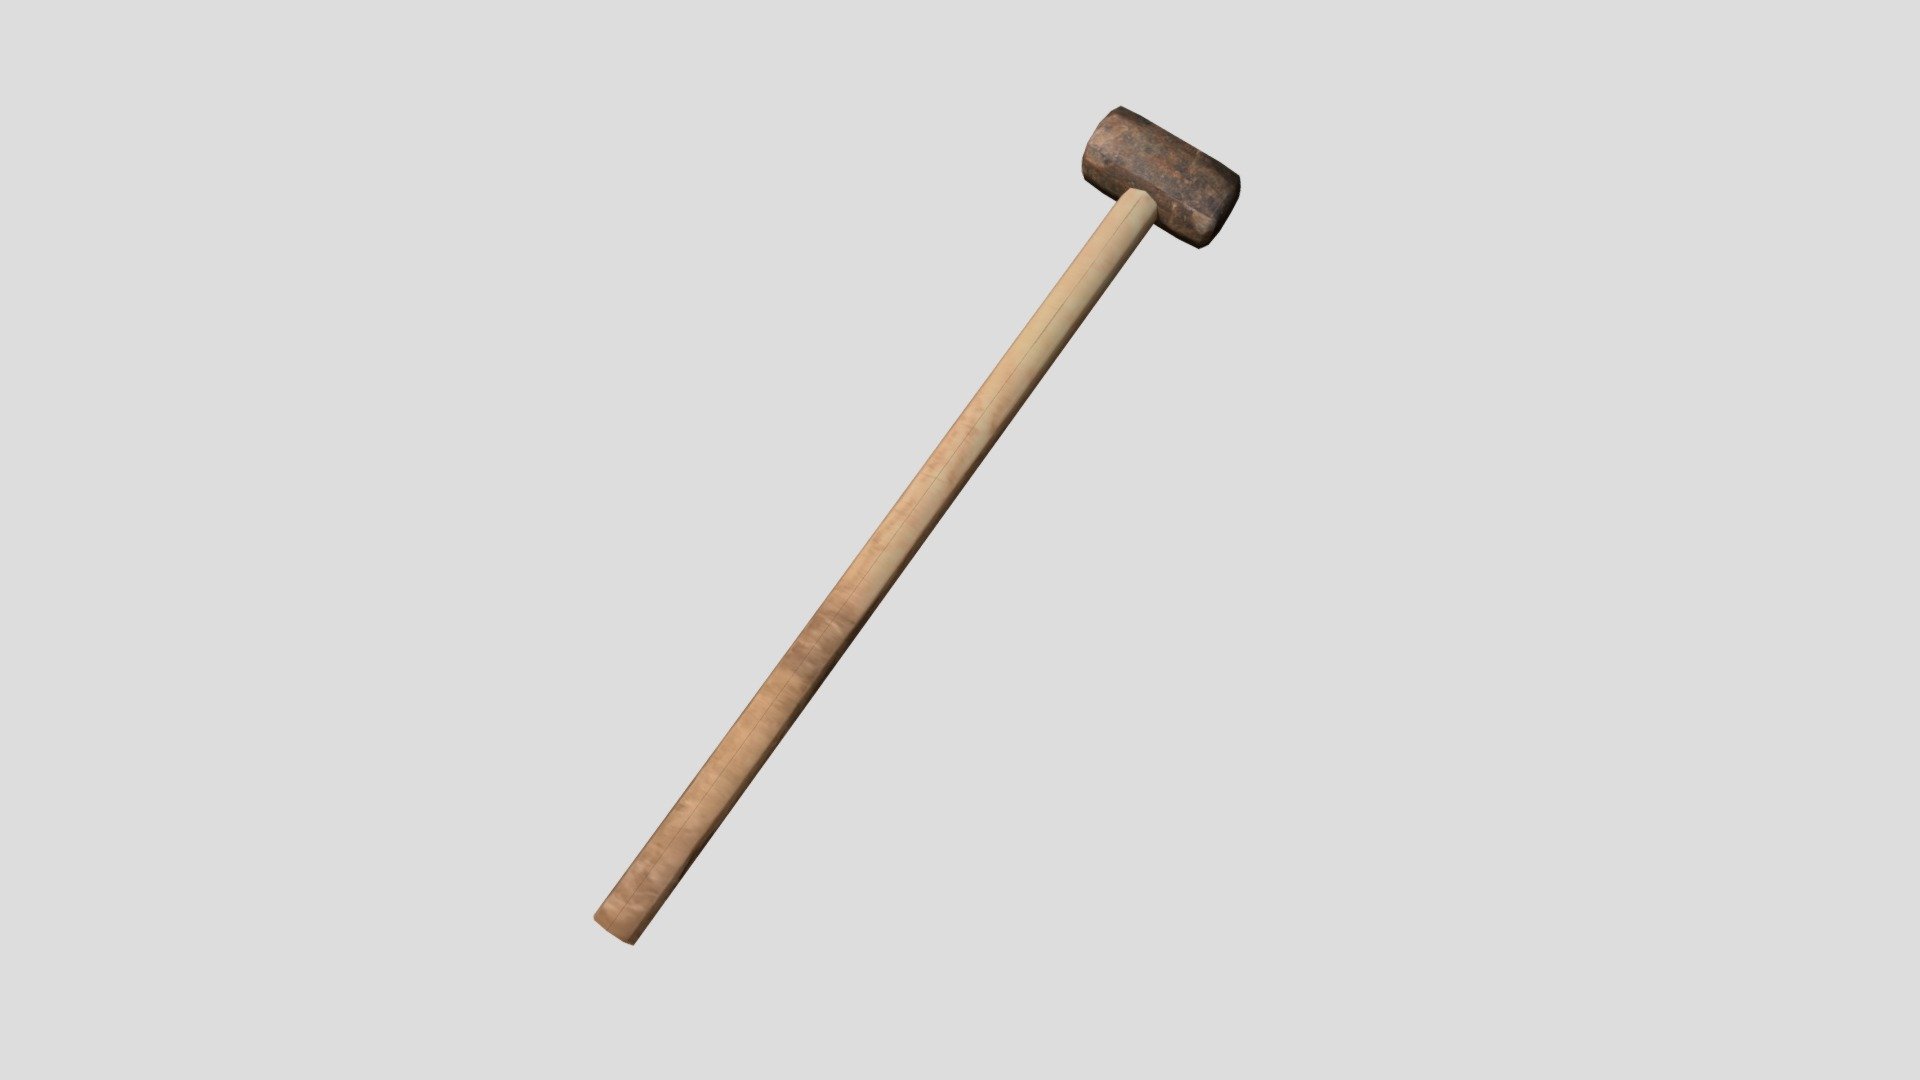 A large hammer either as a weapon or tool. Works great for FPS survival games. Please give feed back in comments below 3d model